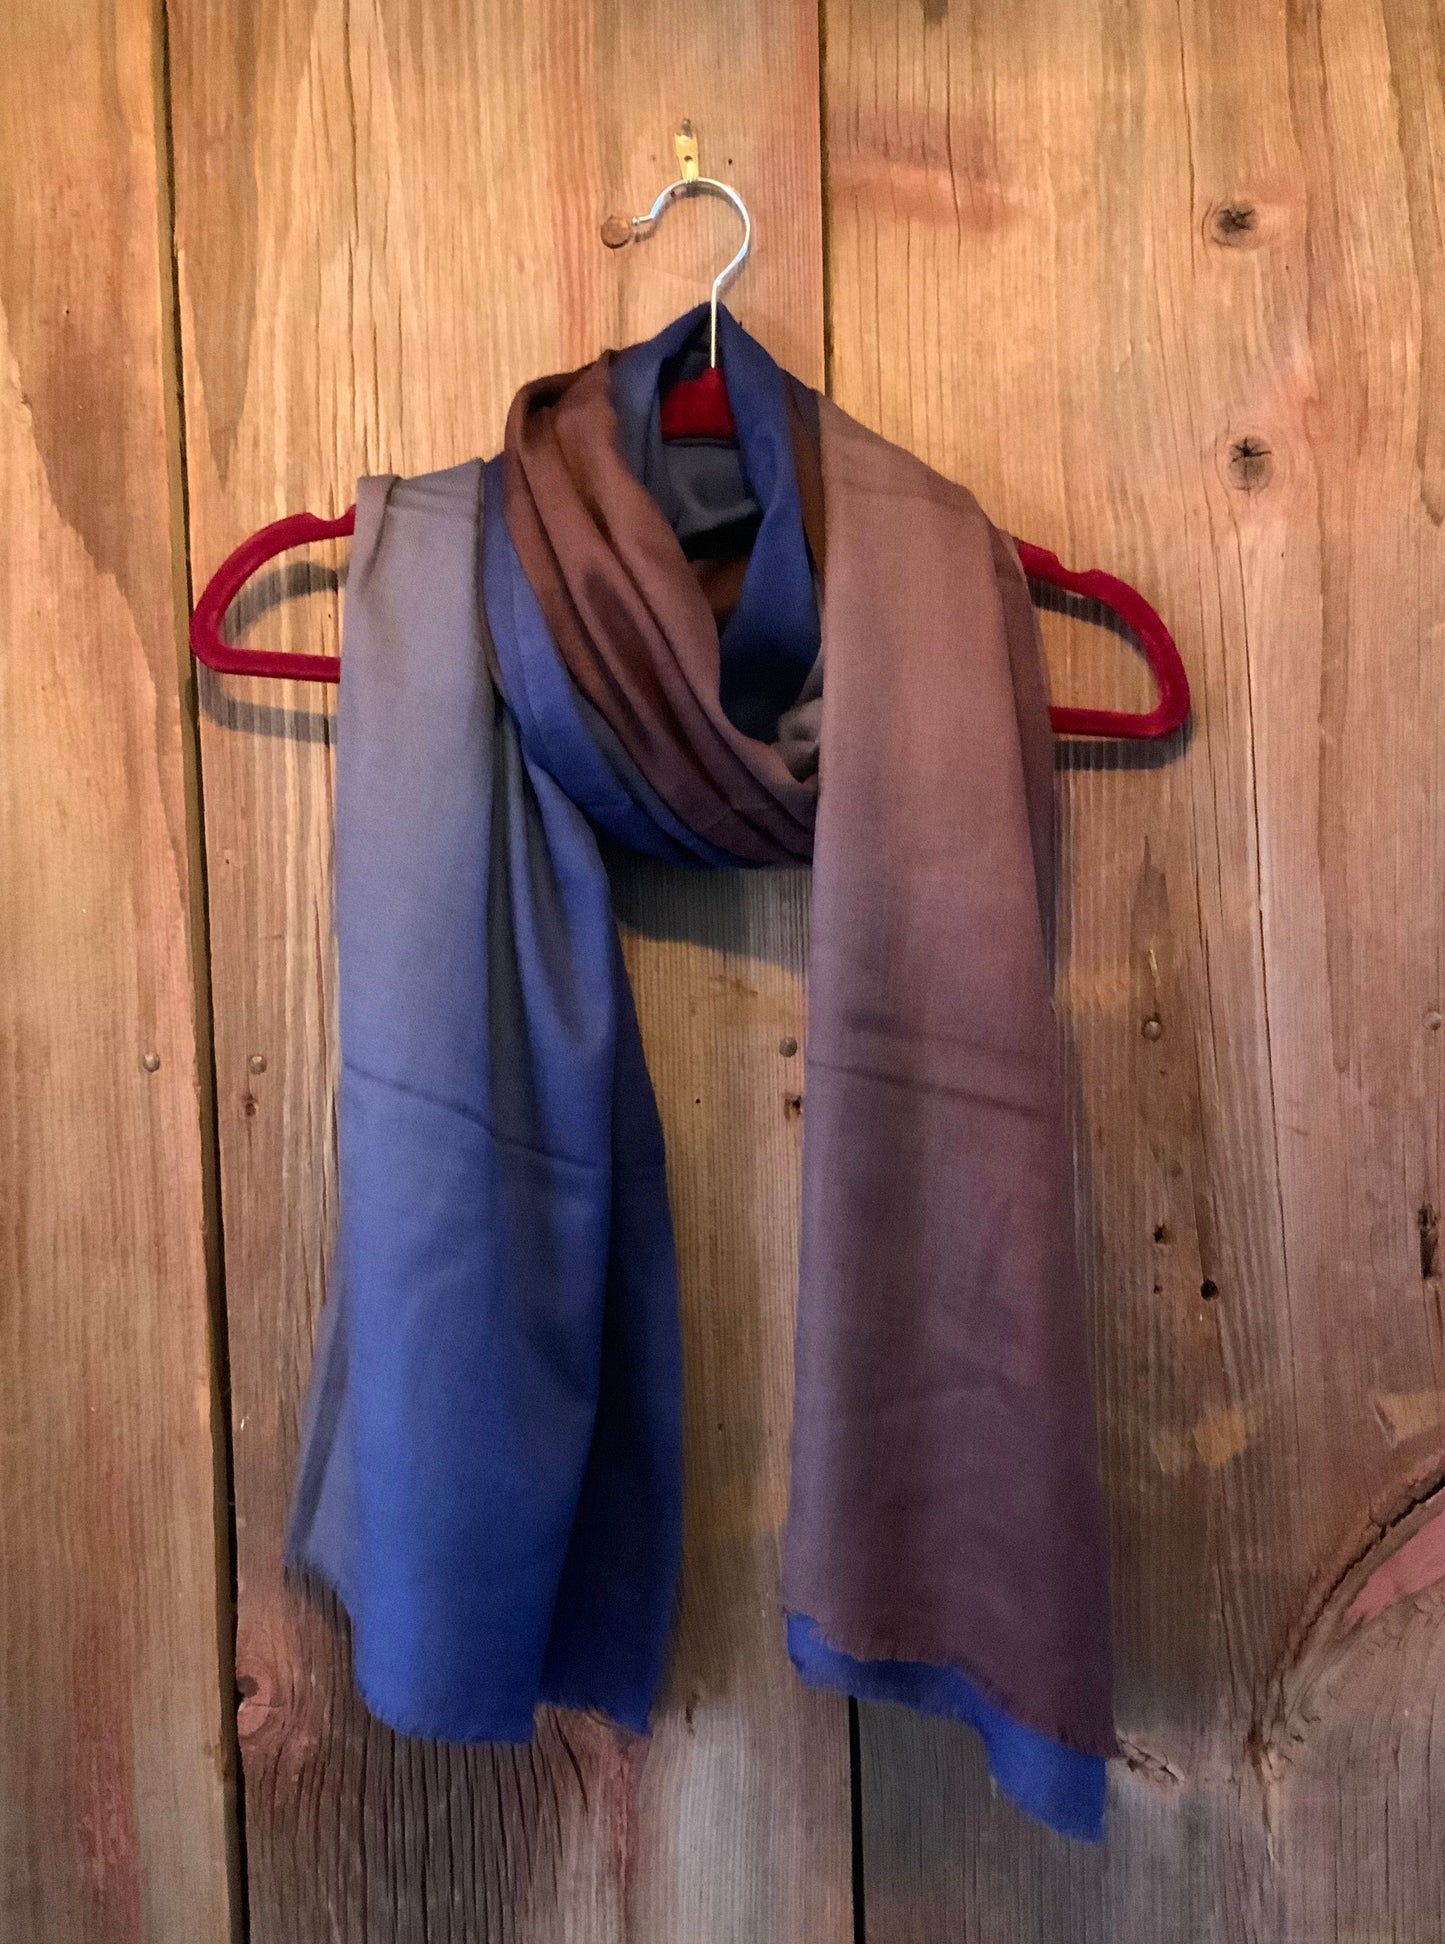 Two tone Kashmir shawl in Brown and Blue #TwoToneKashmirShawl #TrendingShawl #KashmirShawl - DharBazaar